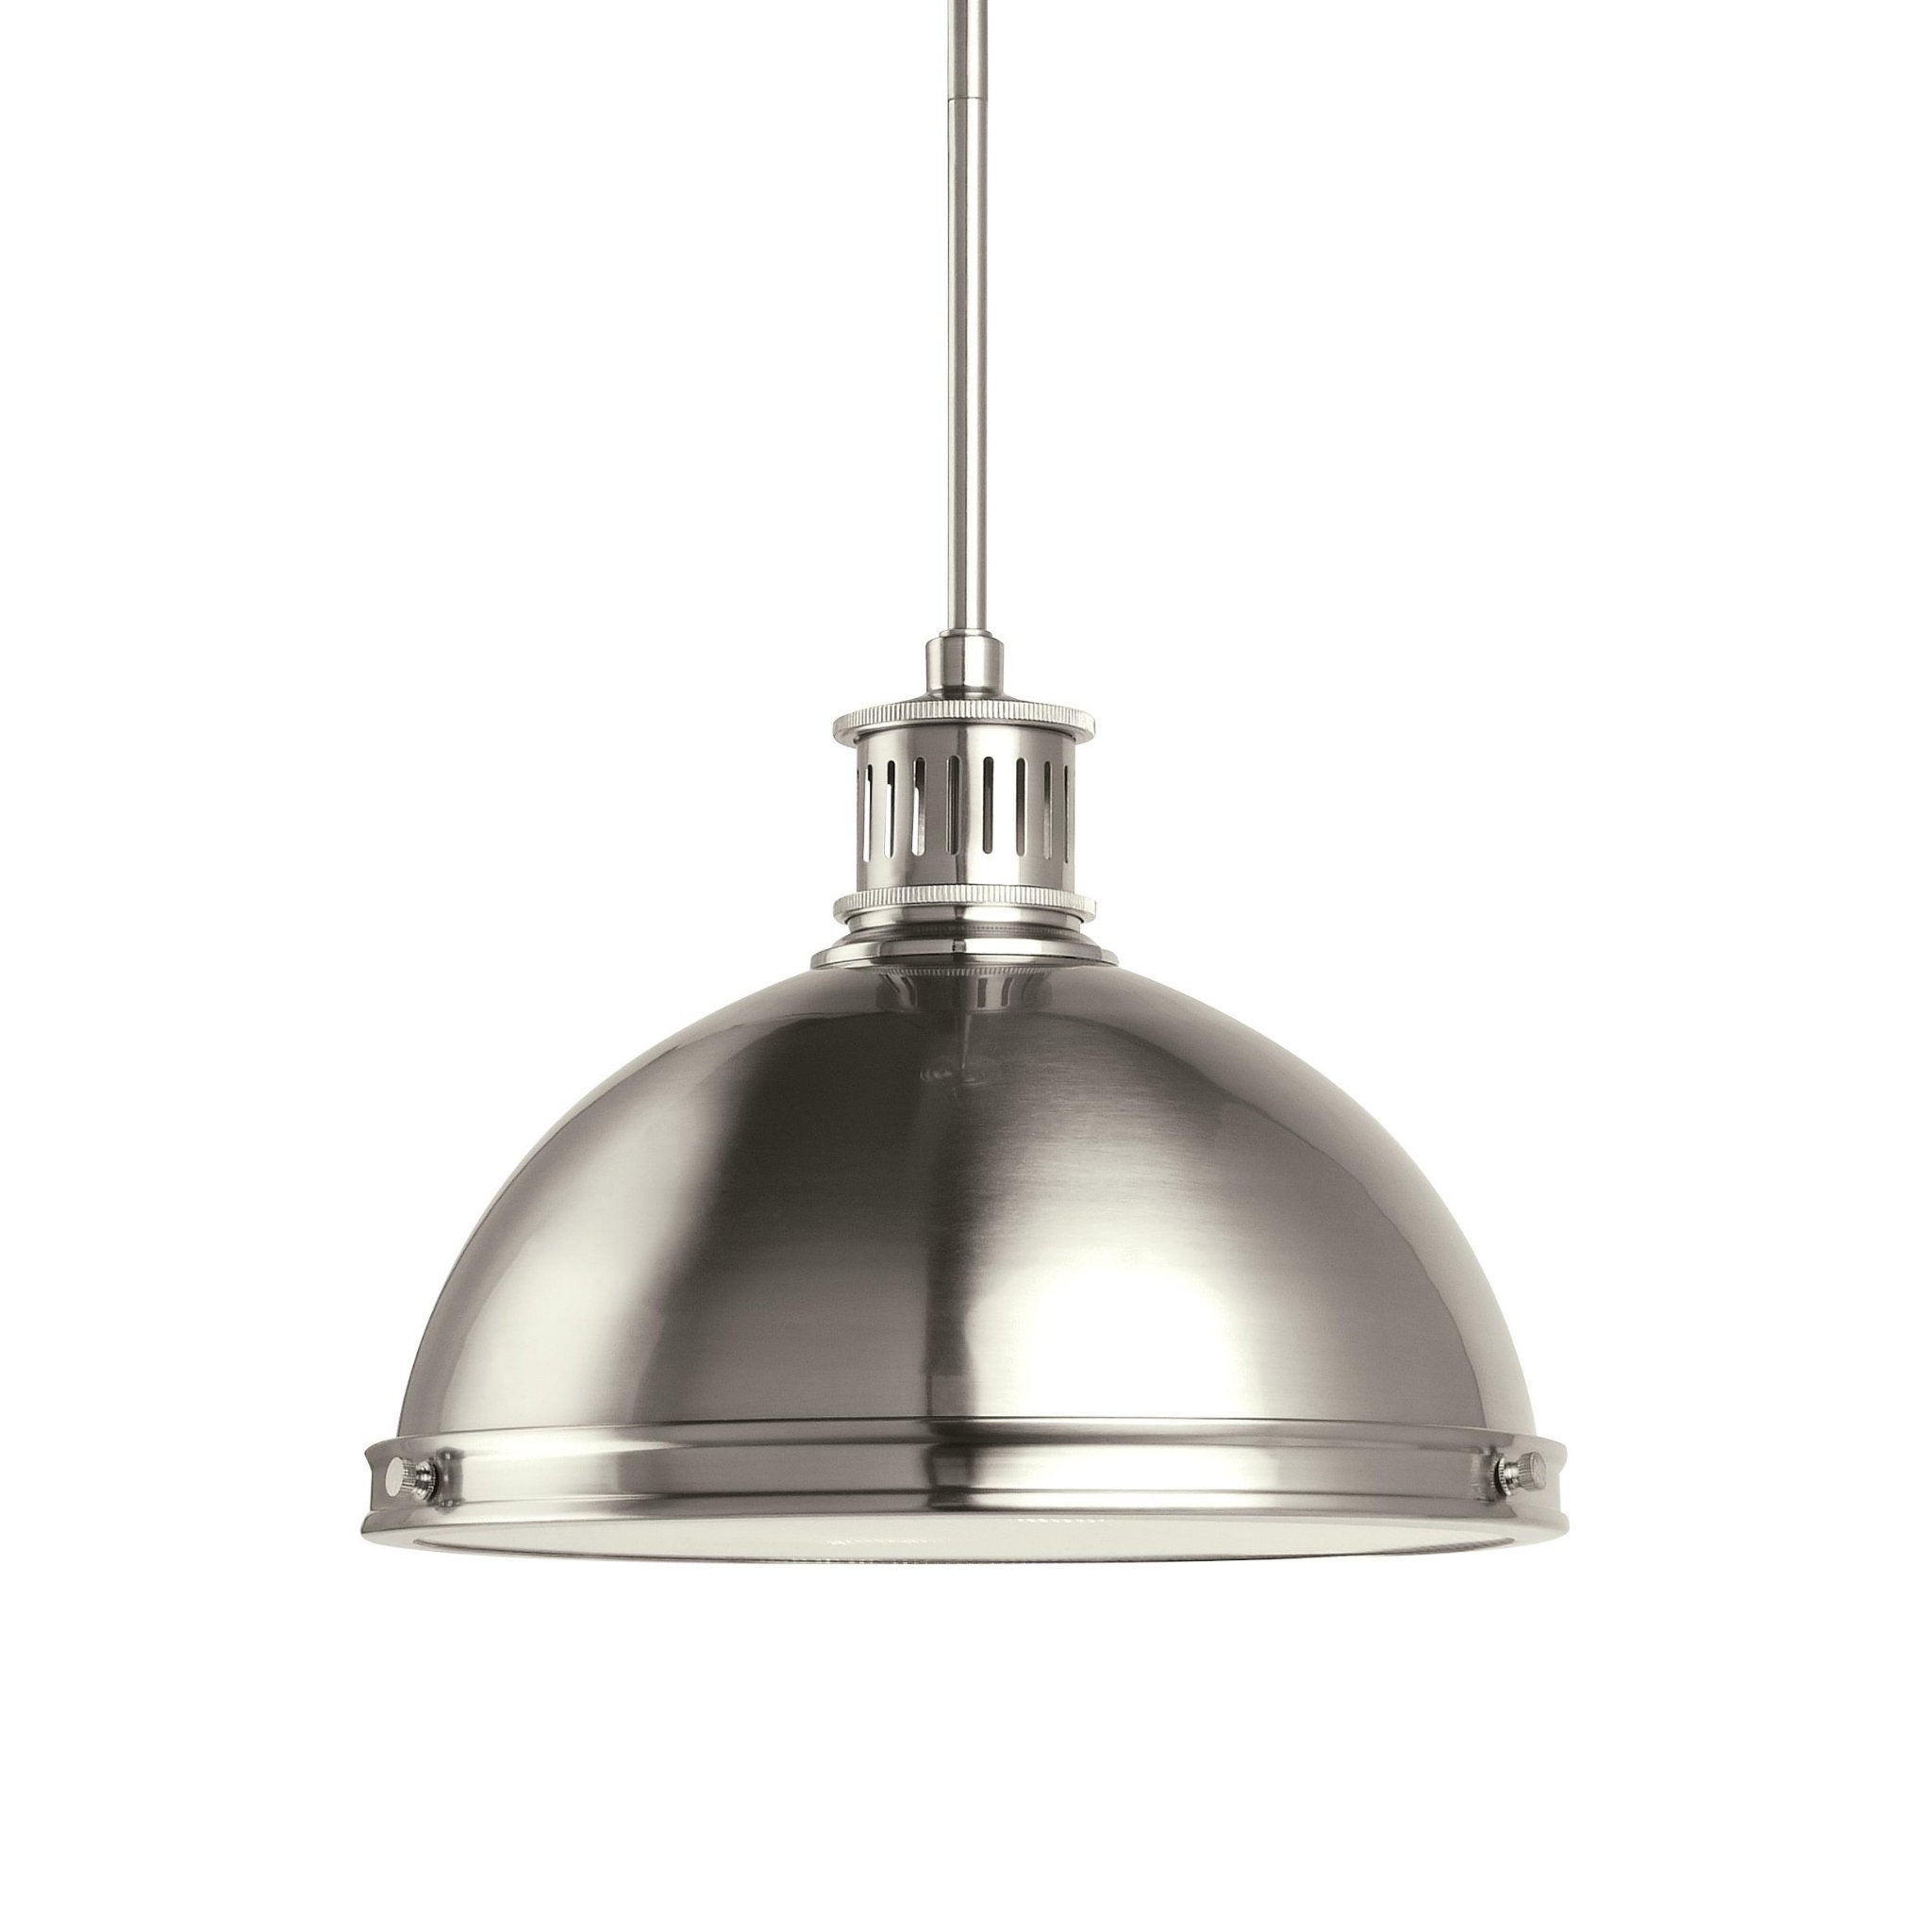 Pratt Street Metal Two Light Pendant LED Contemporary 9.75" Height Steel Round Clear Textured Shade in Brushed Nickel